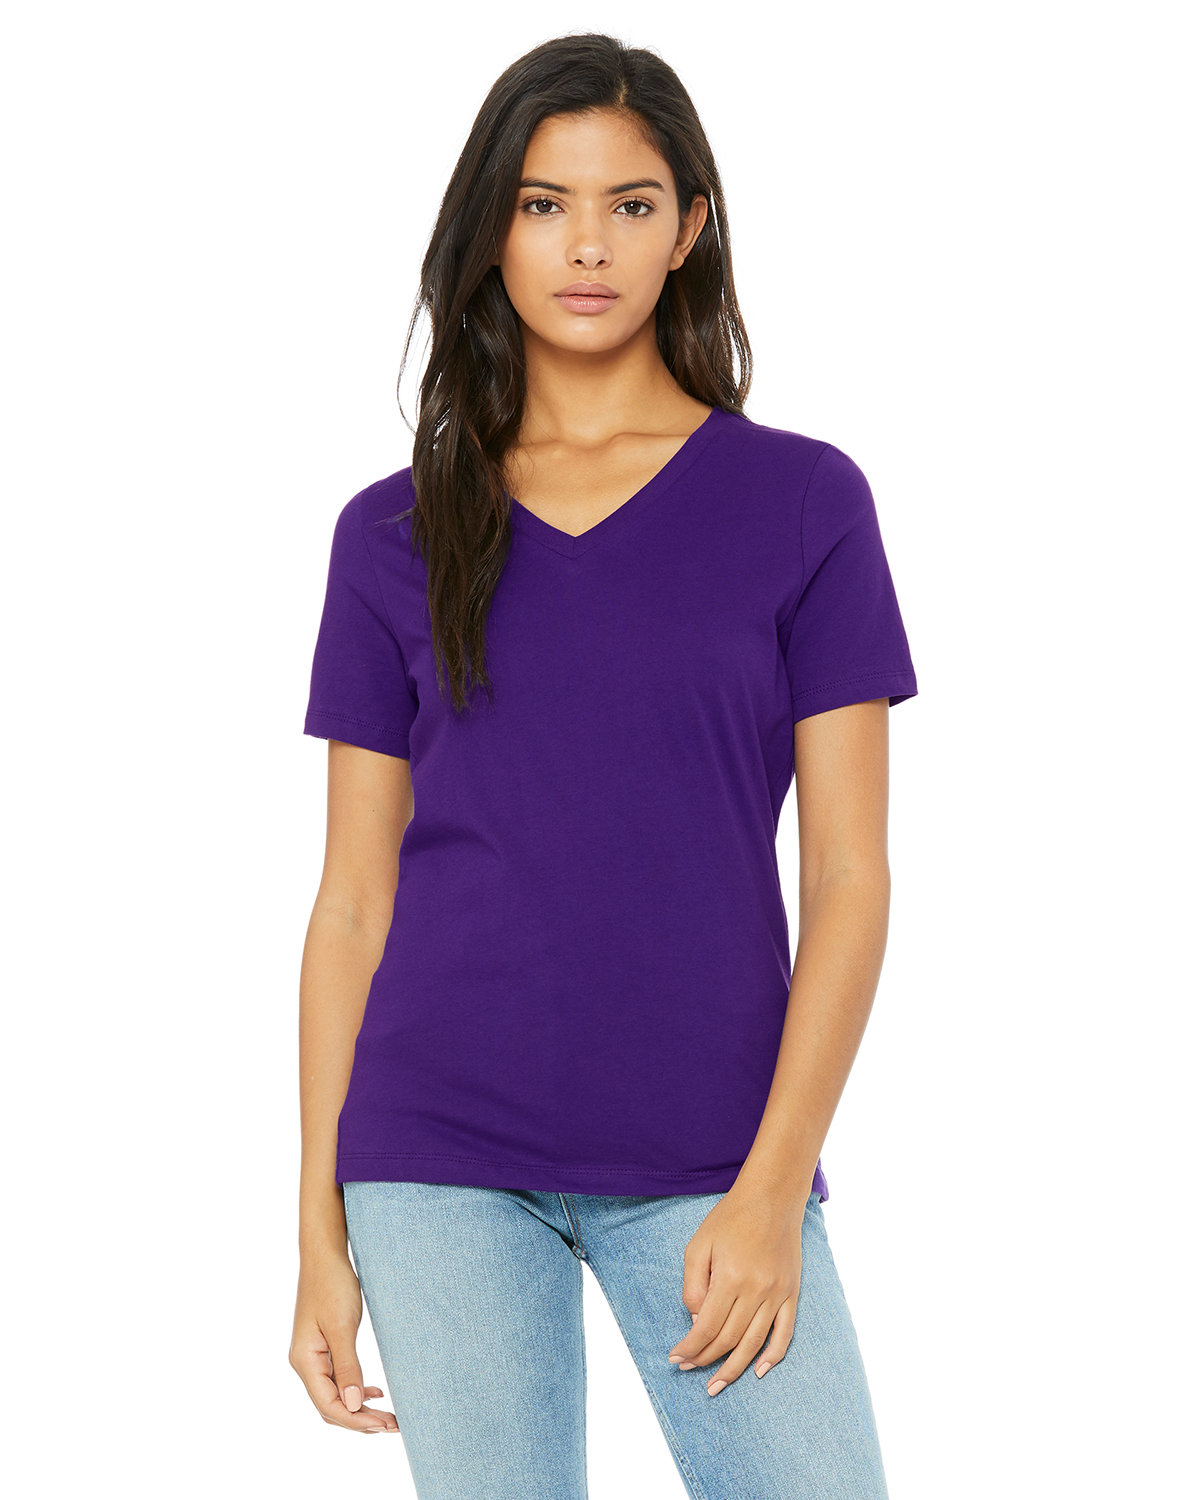 Bella + Canvas Ladies' Relaxed Jersey V-Neck T-Shirt team purple 